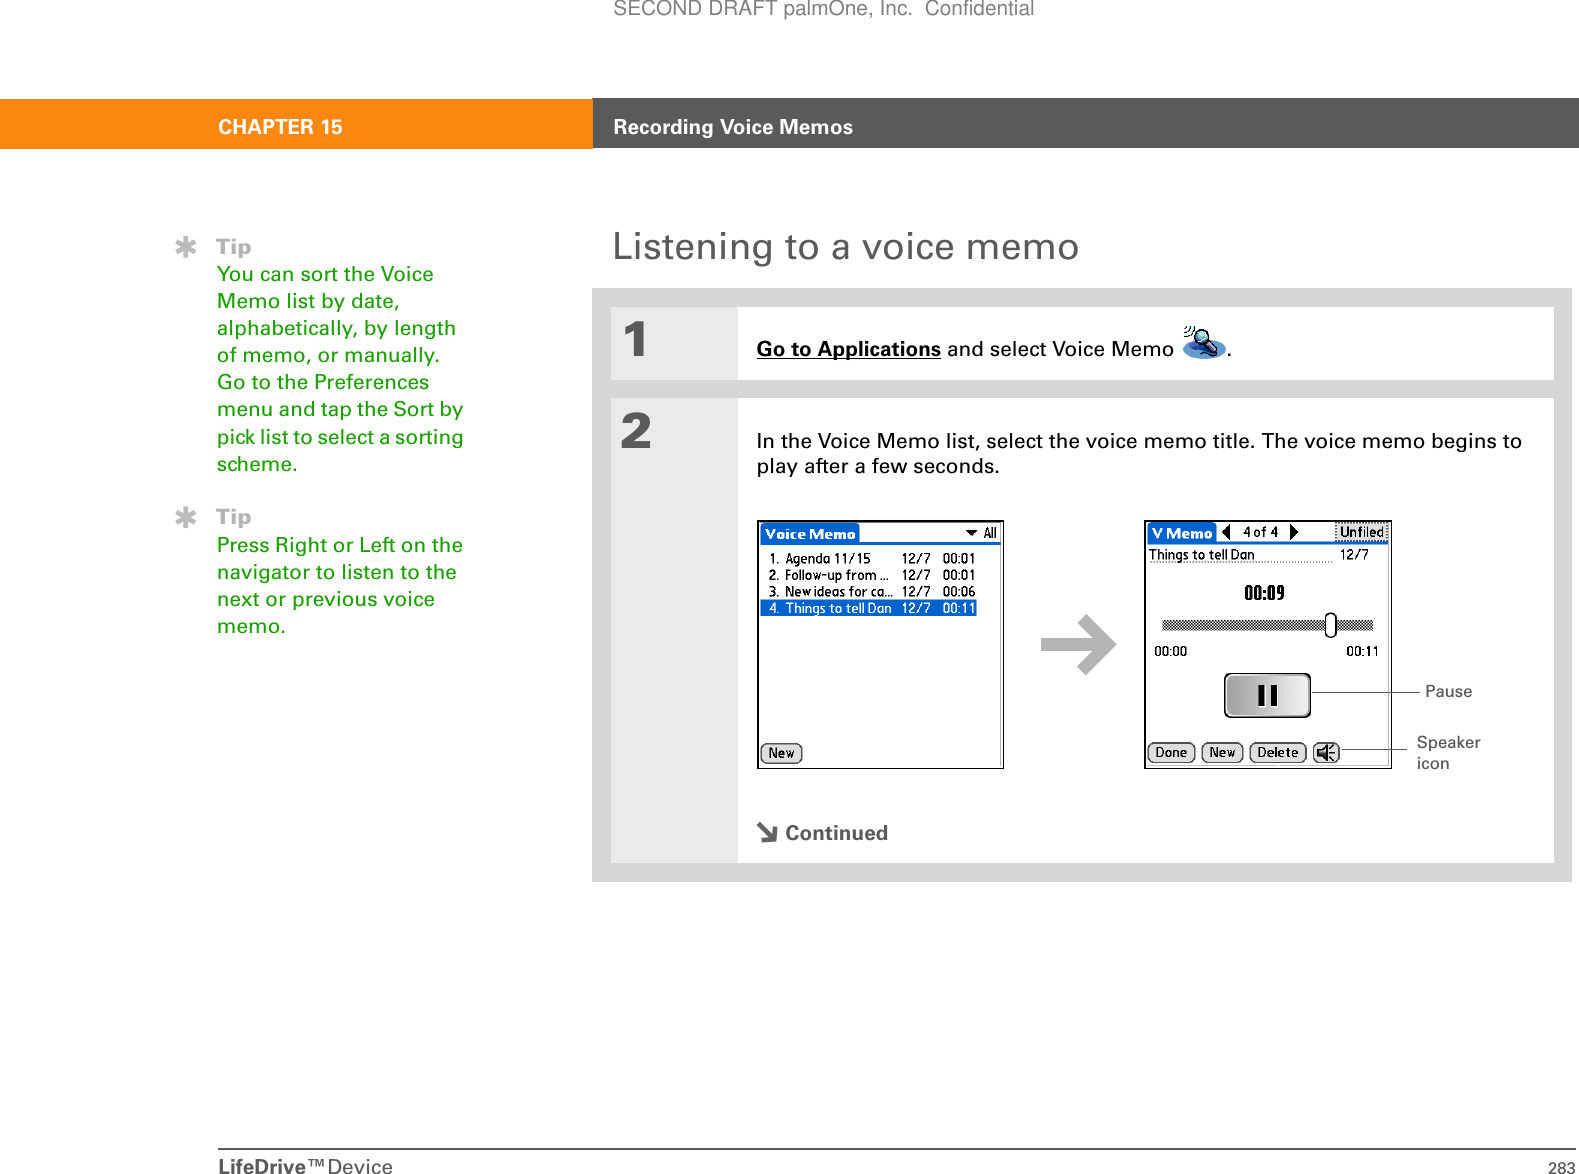 LifeDrive™Device 283CHAPTER 15 Recording Voice MemosListening to a voice memo01Go to Applications and select Voice Memo  . 2In the Voice Memo list, select the voice memo title. The voice memo begins to play after a few seconds.ContinuedTipYou can sort the Voice Memo list by date, alphabetically, by length of memo, or manually. Go to the Preferences menu and tap the Sort by pick list to select a sorting scheme.TipPress Right or Left on the navigator to listen to the next or previous voice memo.Speaker iconPauseSECOND DRAFT palmOne, Inc.  Confidential